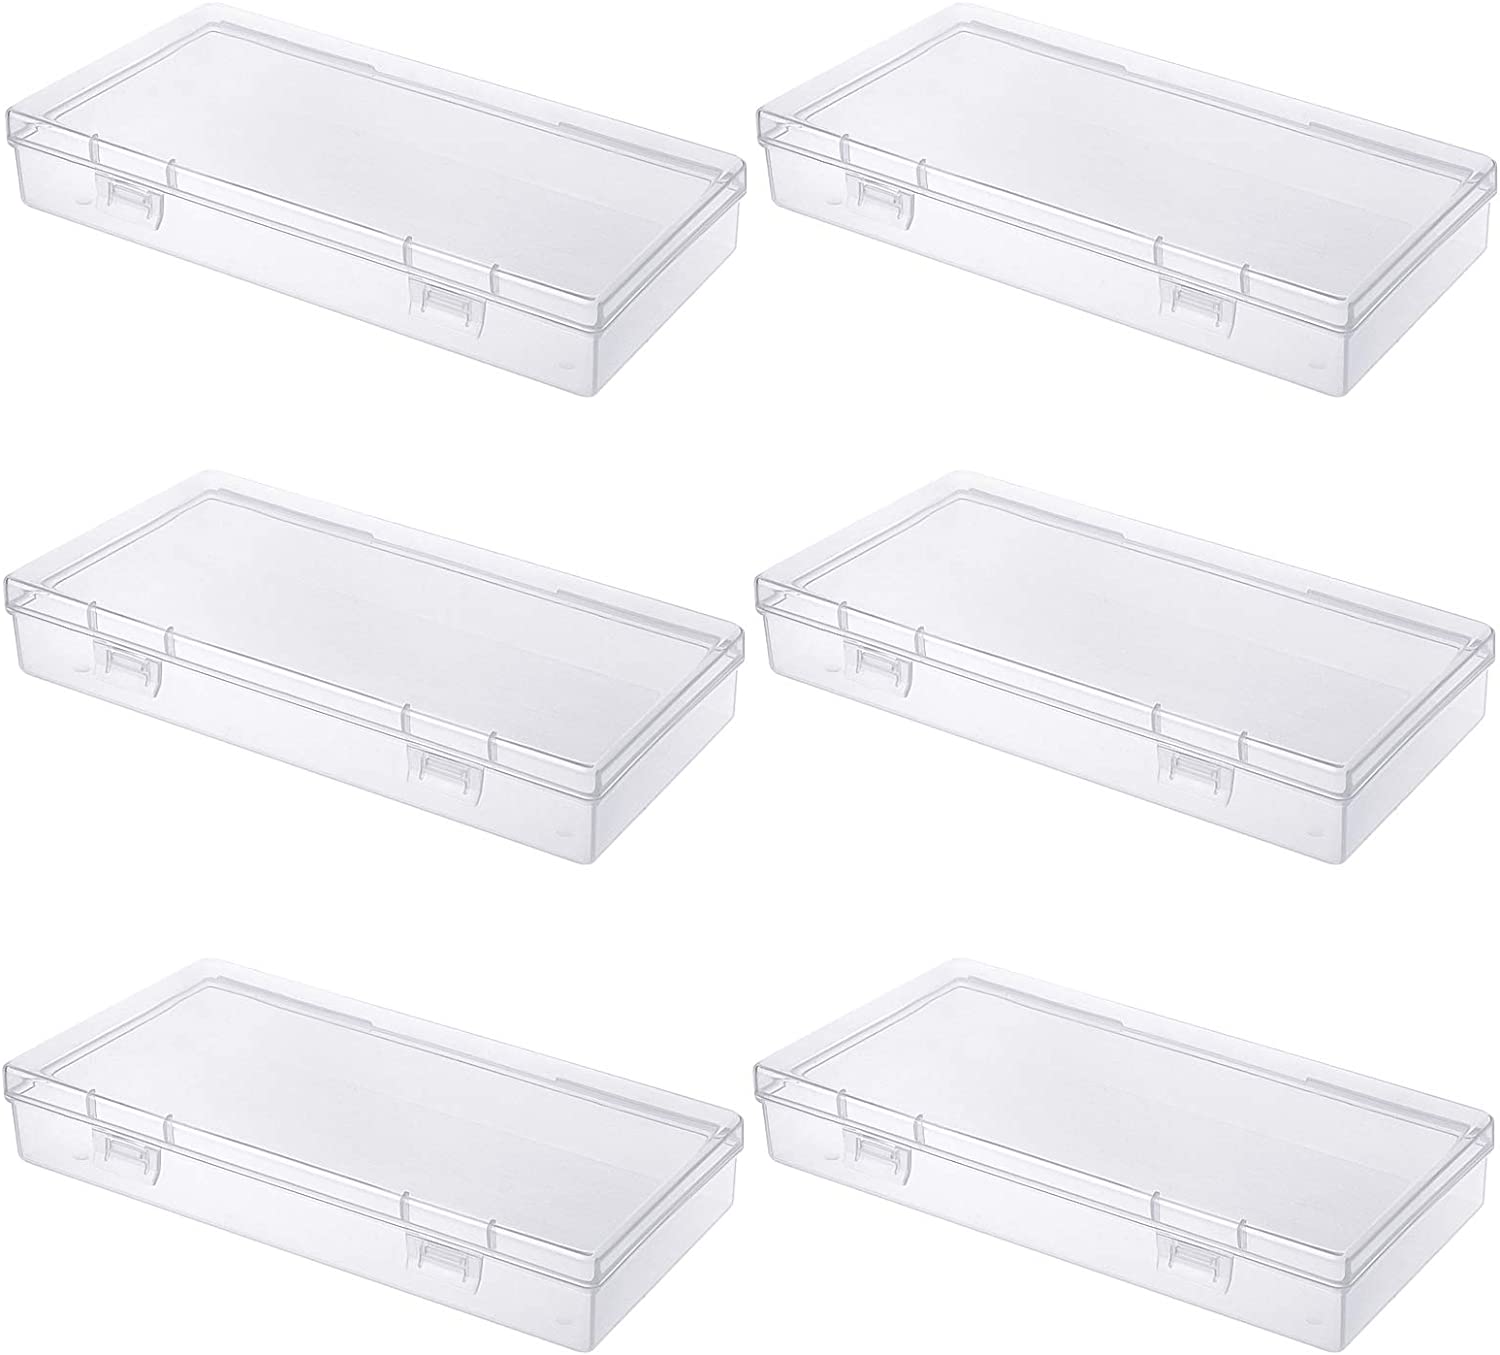 Mini Plastic Storage Containers with Locking Lids, 6 PCS Small Plastic Box  5.4'' x 3'' x 2'' Clear Assorted Color Boxes Organizer Arts and Crafts